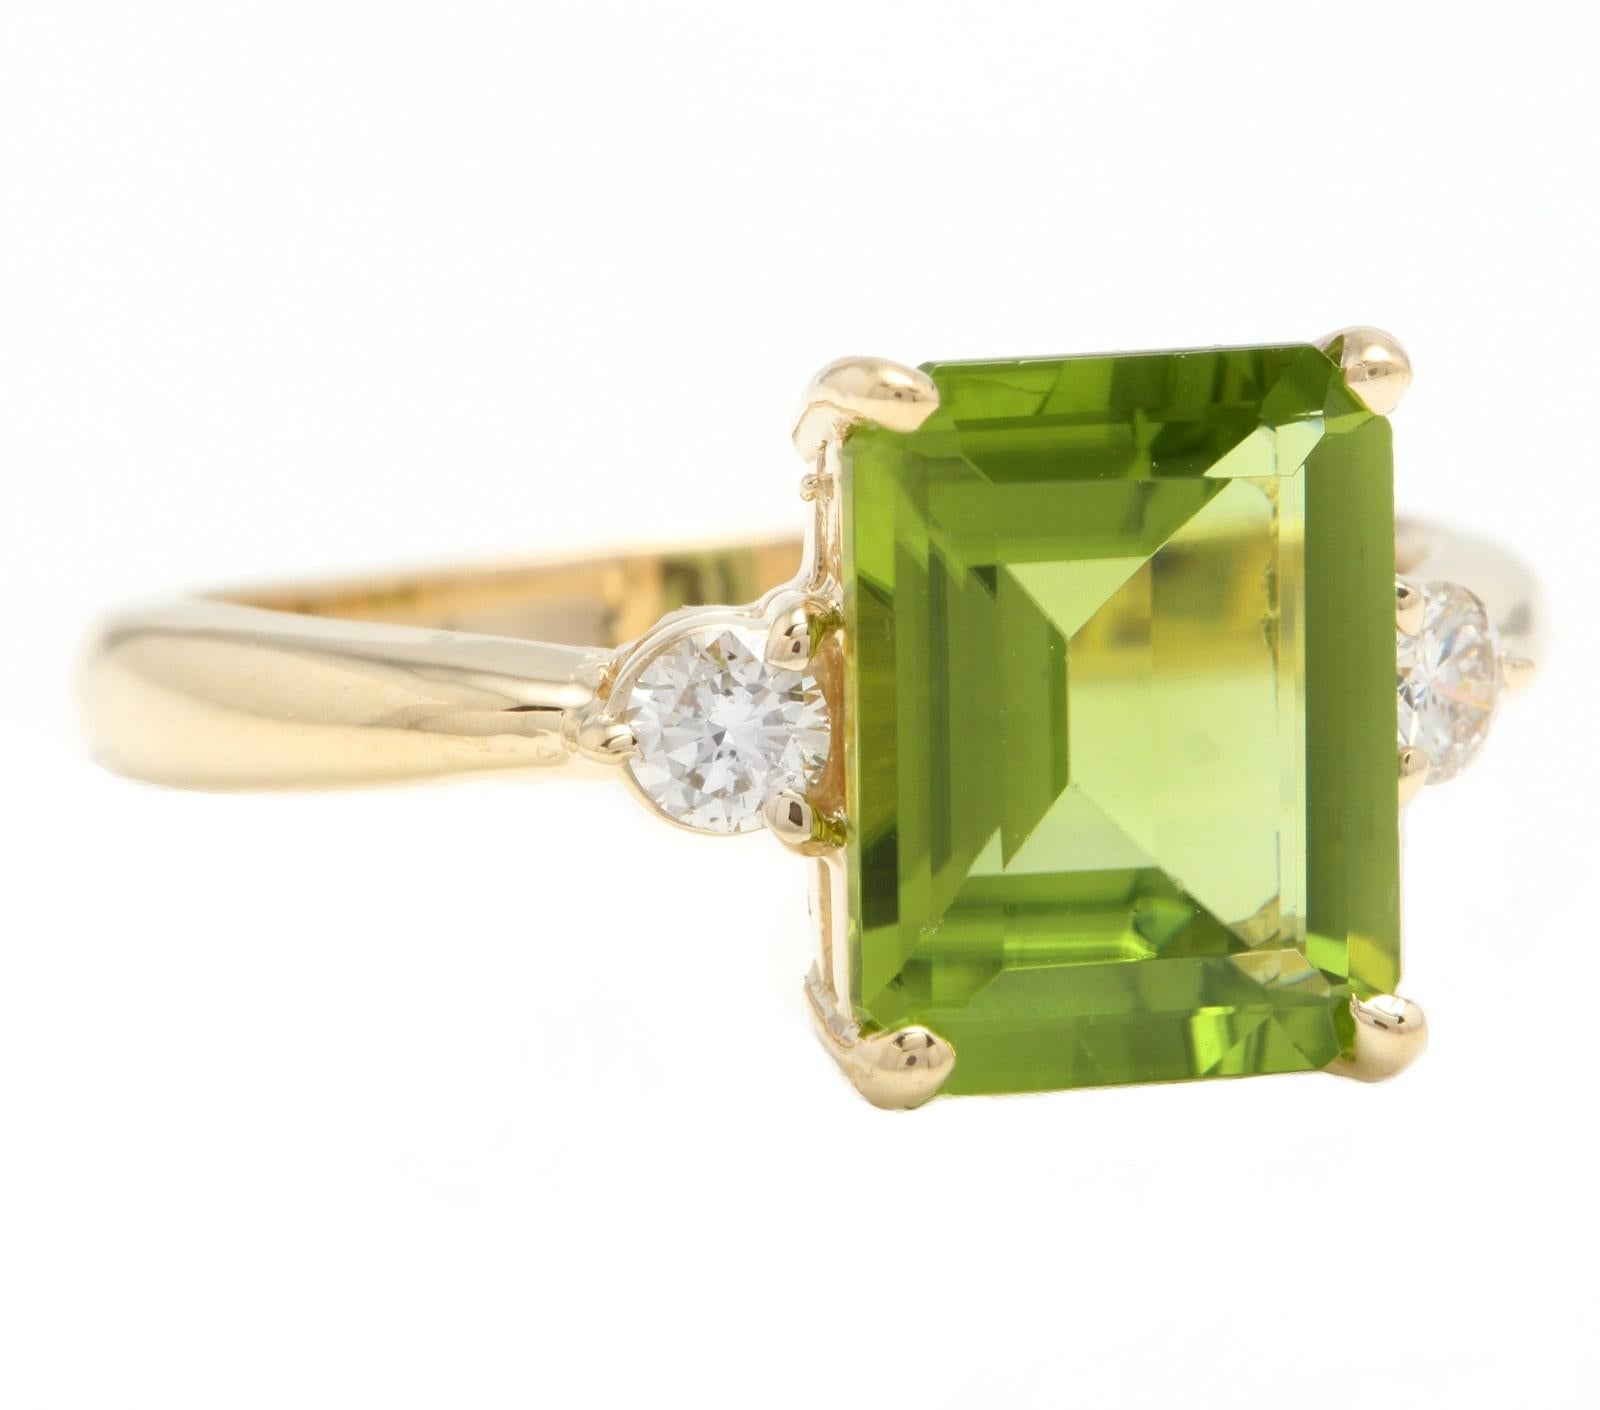 3.18 Carats Natural Very Nice Looking Peridot and Diamond 14K Solid Yellow Gold Ring

Stamped: 14K

Suggested Replacement Value: Approx. $3,500.00

Total Natural Emerald Cut Peridot Weight is: Approx. 3.00 Carats 

Peridot Measures: Approx. 10 x